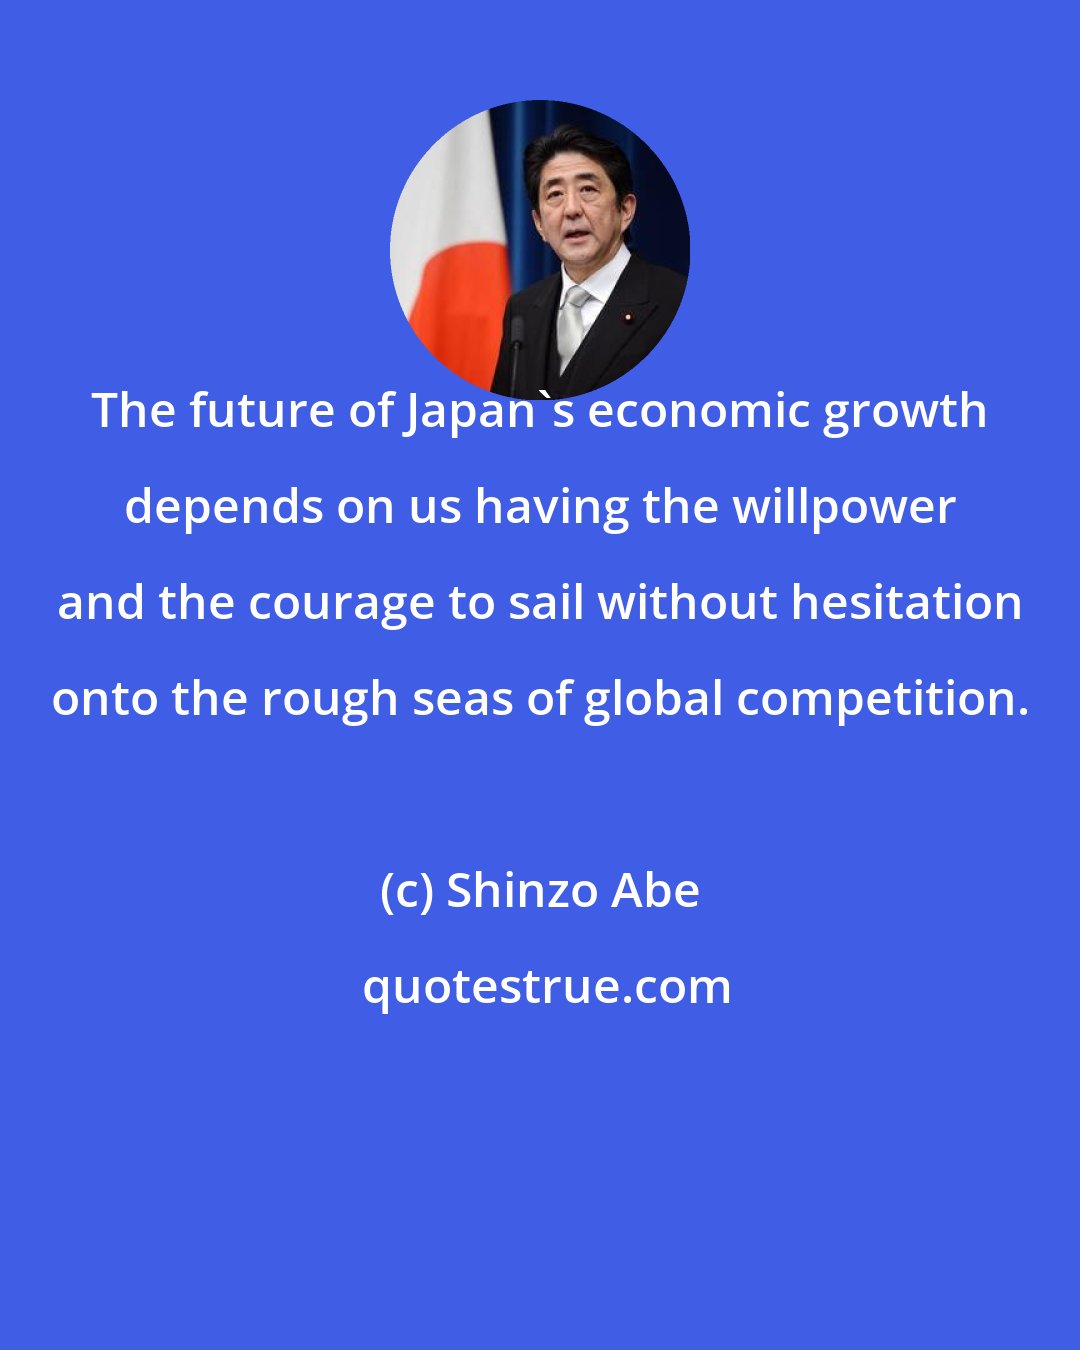 Shinzo Abe: The future of Japan's economic growth depends on us having the willpower and the courage to sail without hesitation onto the rough seas of global competition.